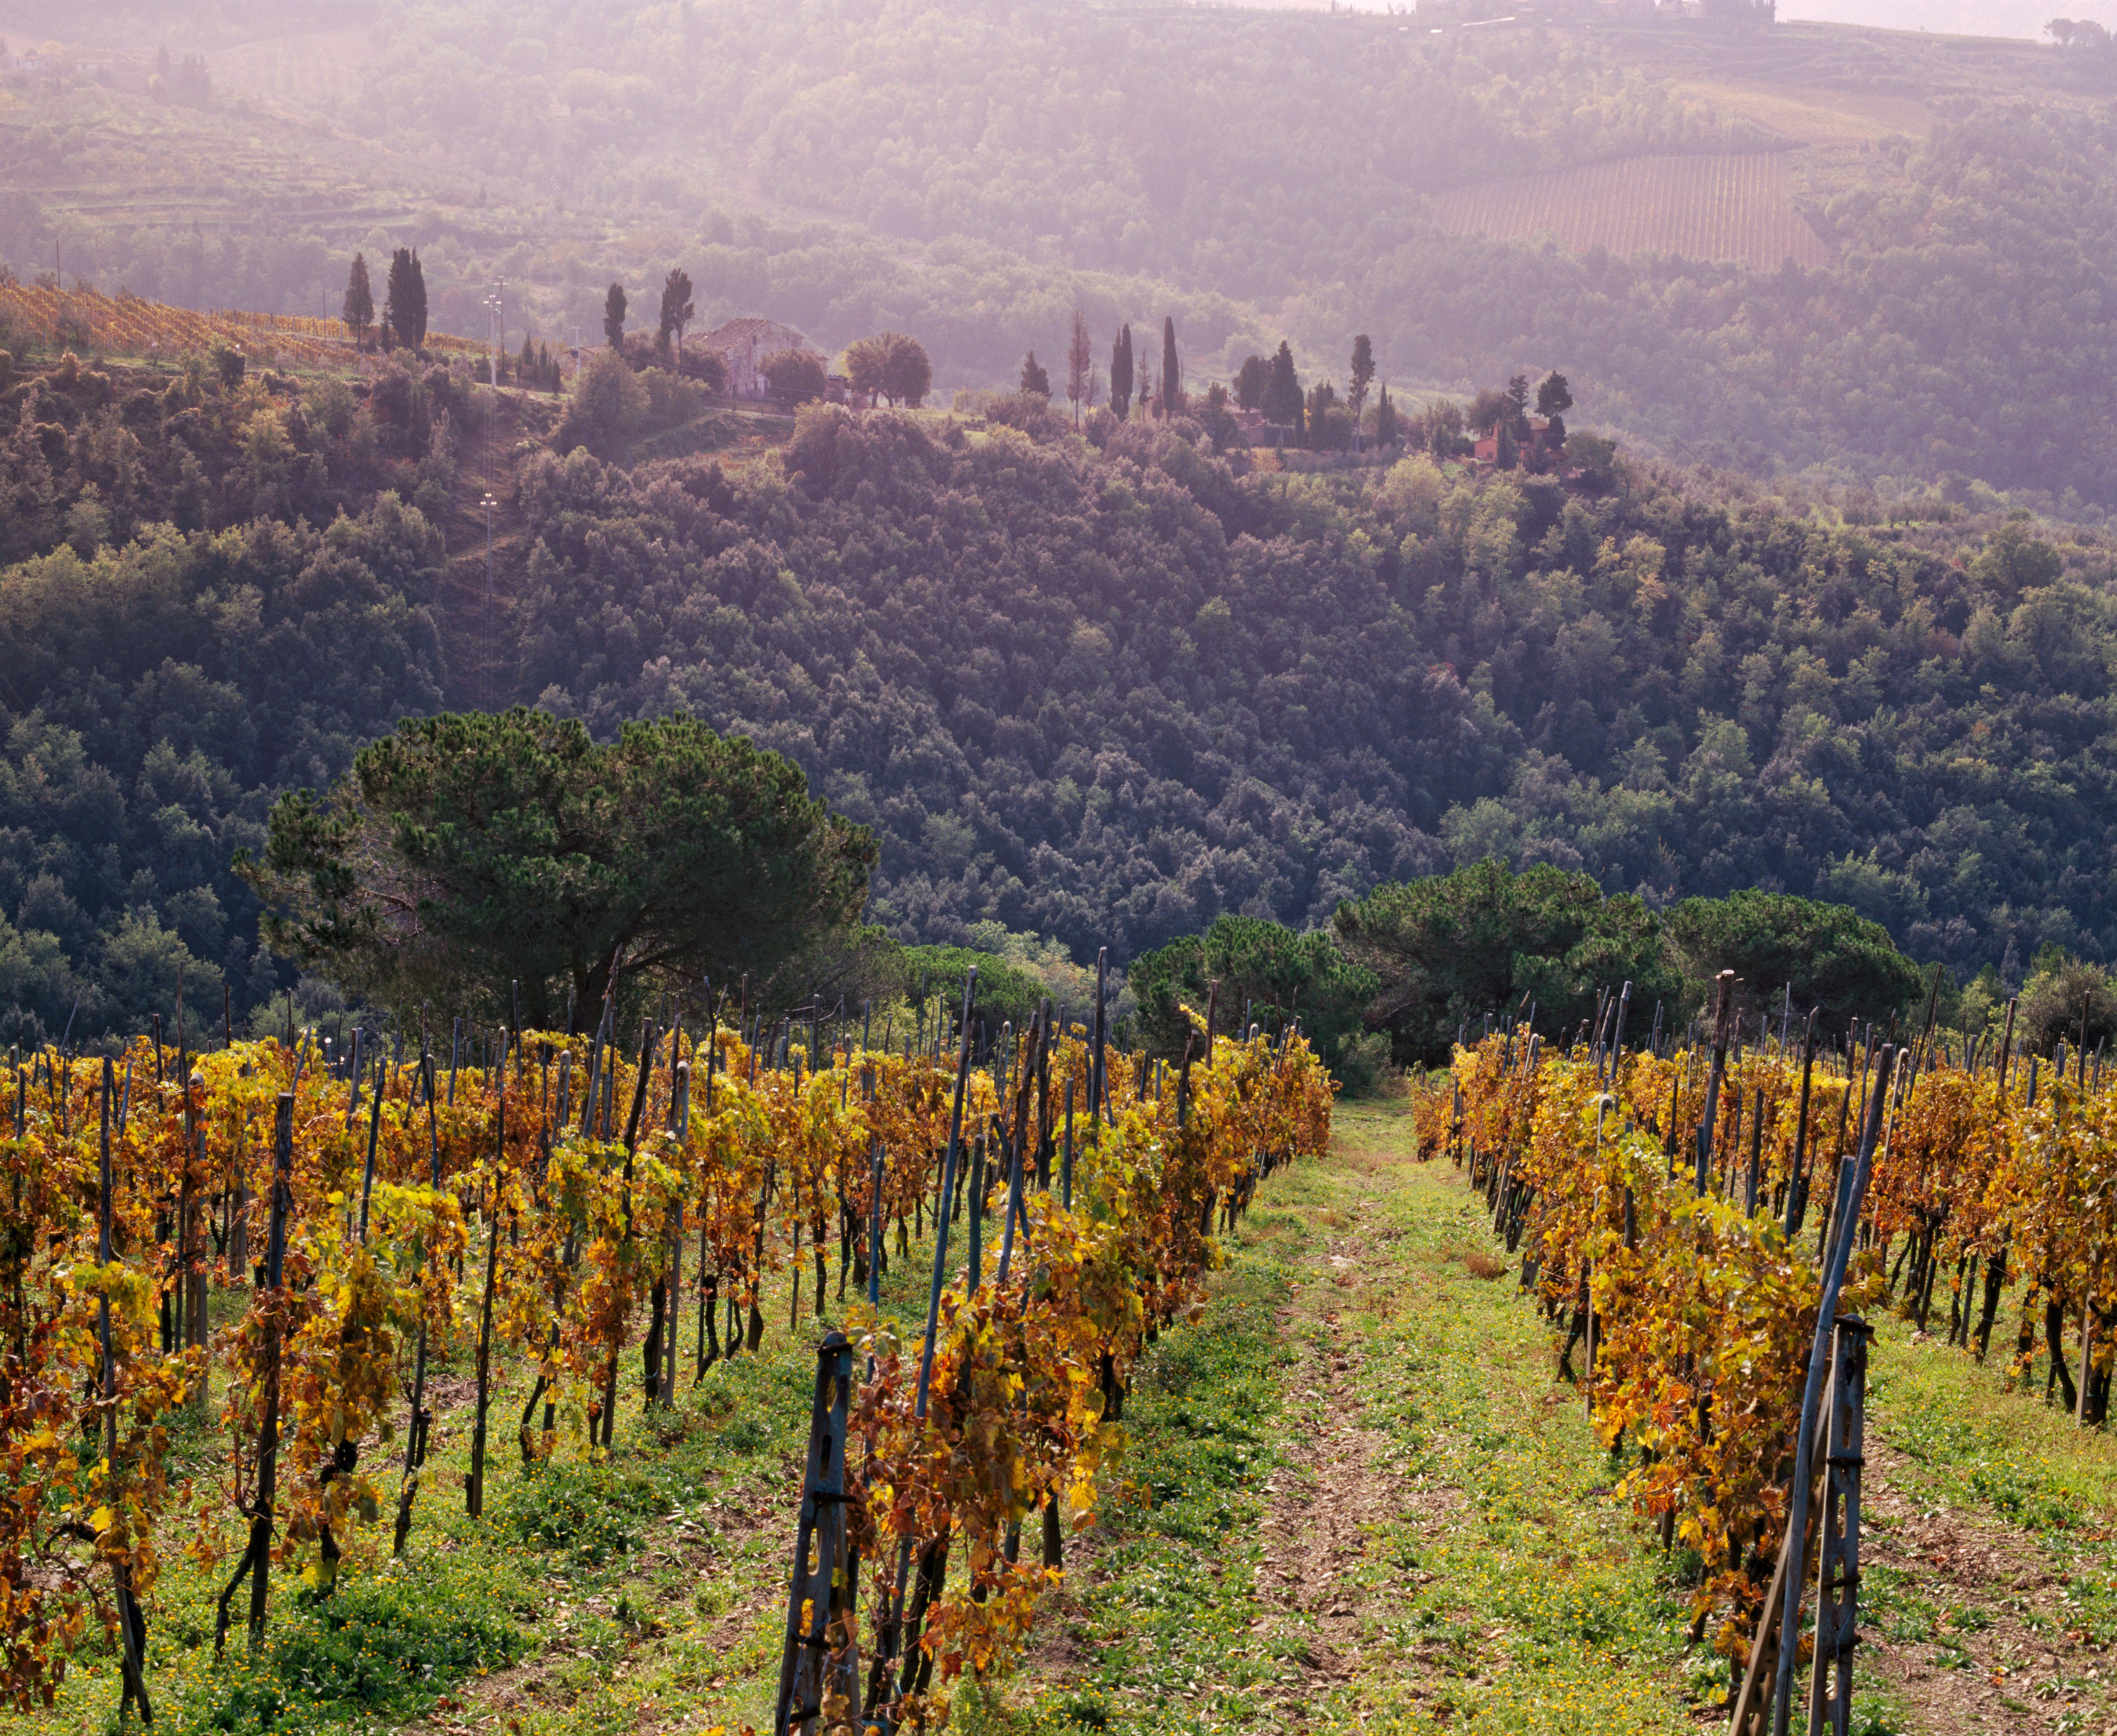 Querciabella’s organic, sustainable approach results in vegan-friendly wines that hold their own against the Super Tuscans